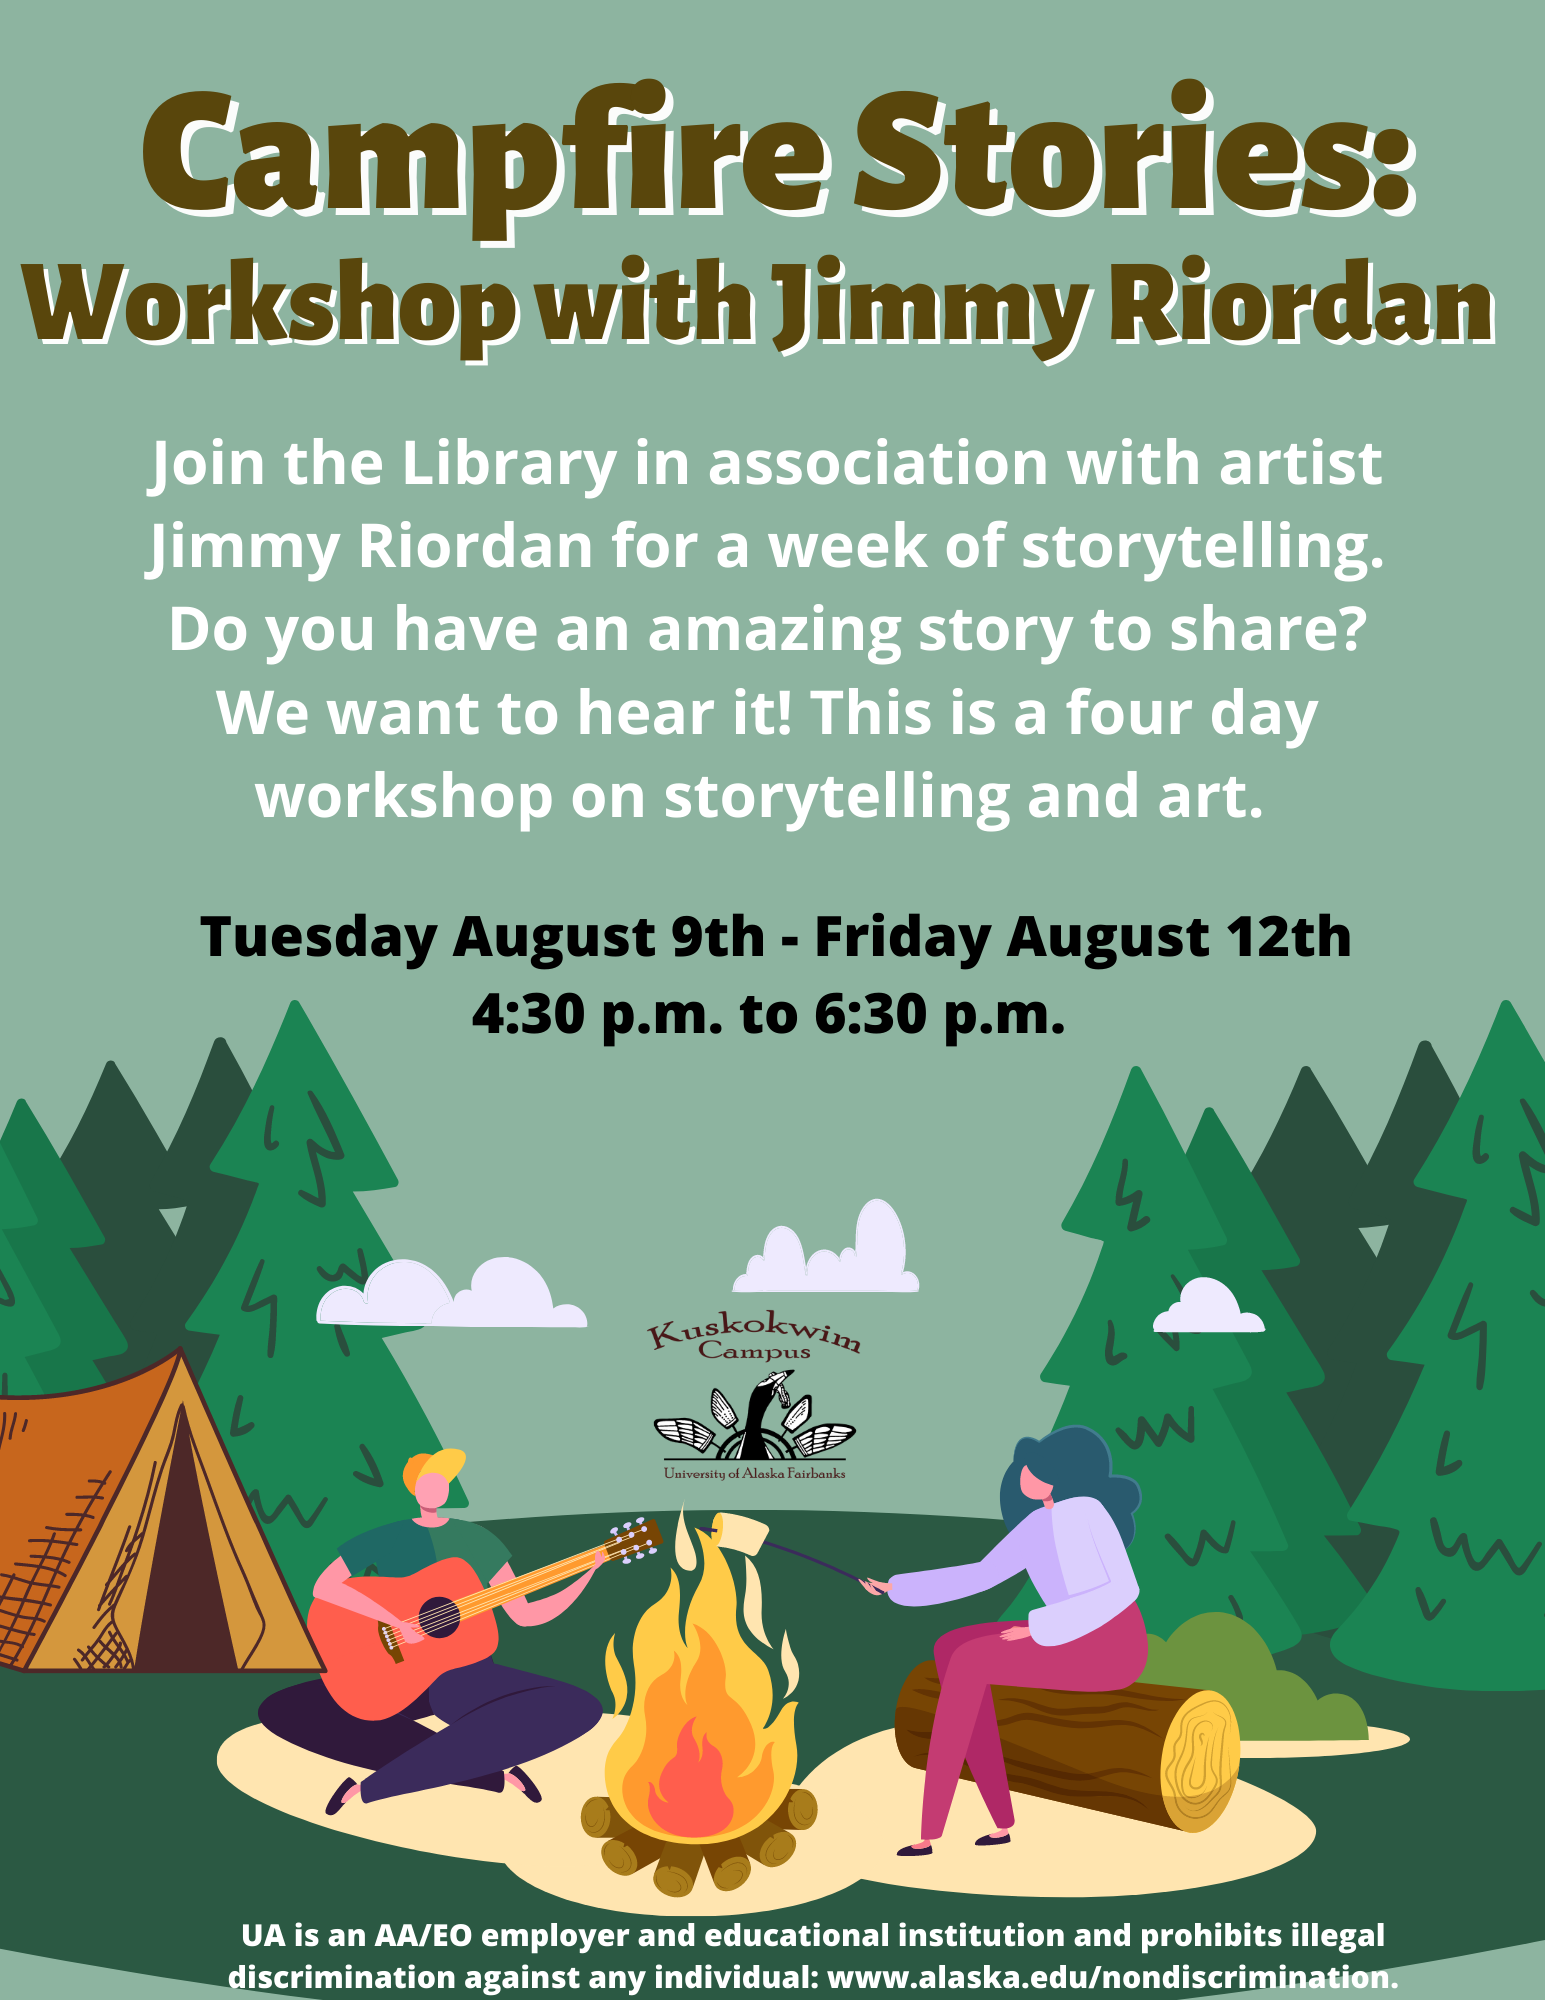 Campfire stories: workshop with Jimmy Riordan. Join the library in association with artist Jimmy Riordan for a week of storytelling. Do you have an amazing story to share? We want to hear it! This is a four day workshop on sotrytelling and art. Tuesday August 9th - Friday August 12th. 4:40 - 6:30 pm. 